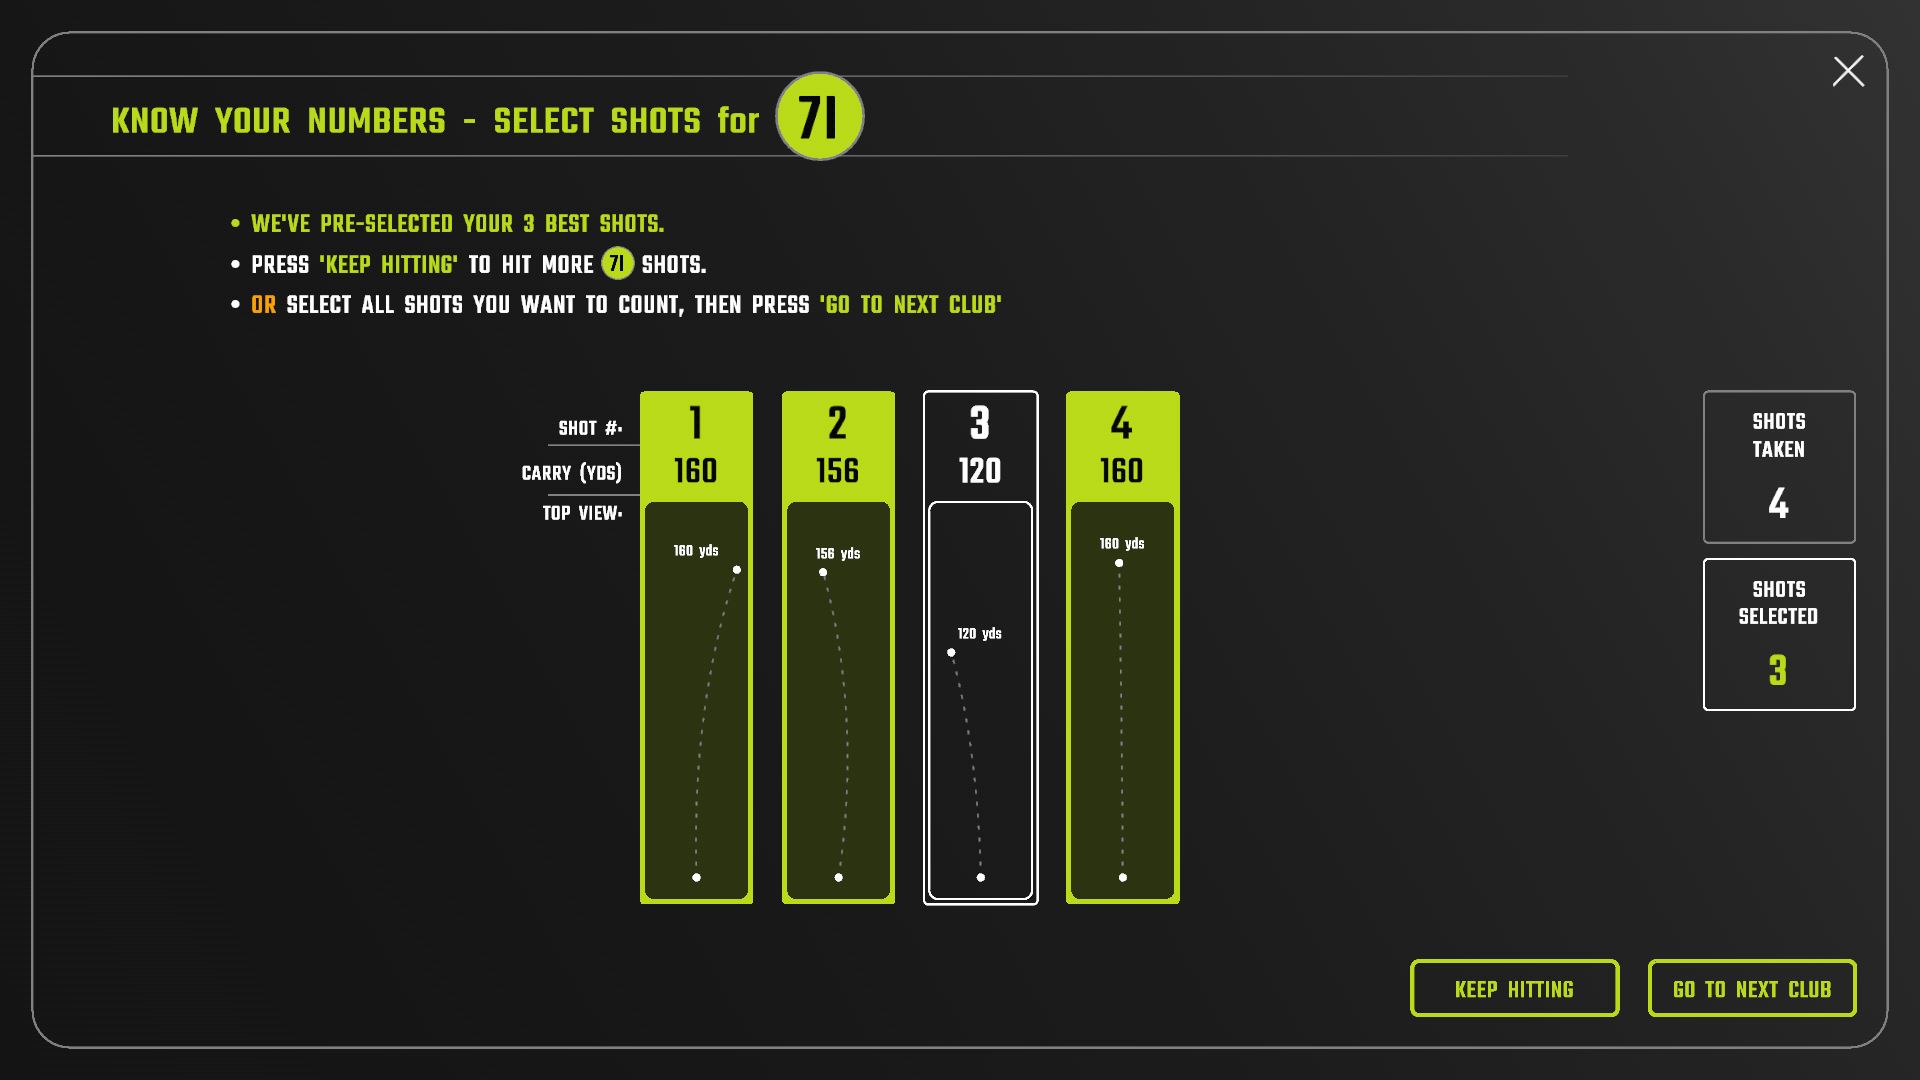 Know Your Numbers - Select Shots